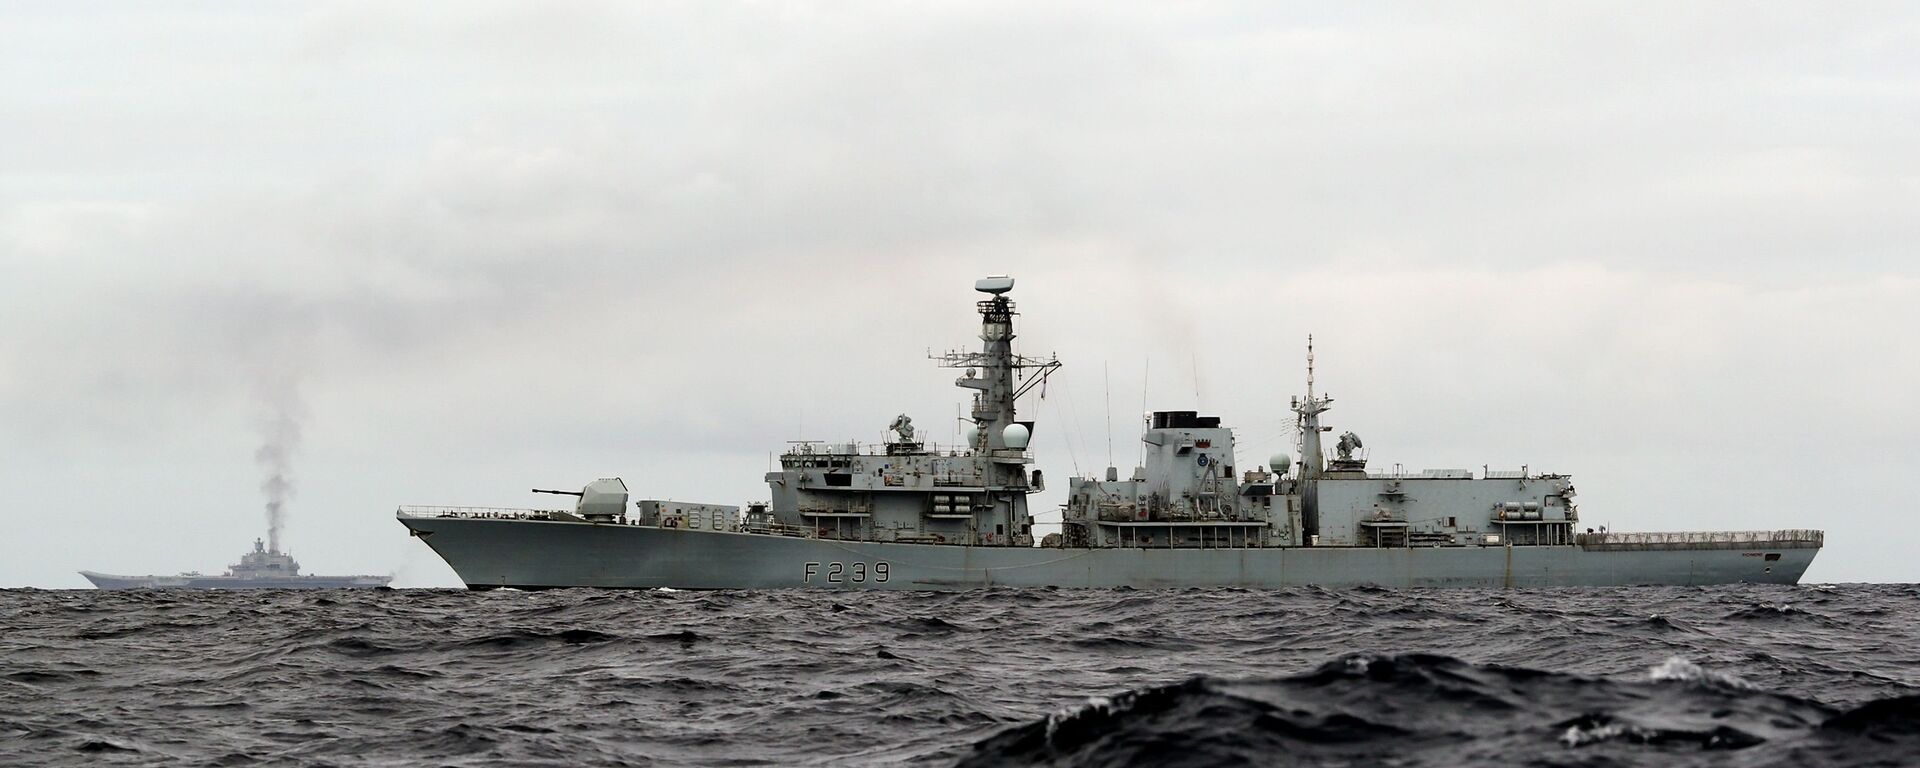 This is a handout photo issued by Britain's Ministry of Defence taken on Wednesday Oct. 19, 2016, of HMS Richmond, foreground, a Type 23 Duke Class frigate, observing aircraft carrier Admiral Kuznetsov, at rear left, which is part of a Russian task group, during transit through the North Sea - Sputnik International, 1920, 27.09.2021